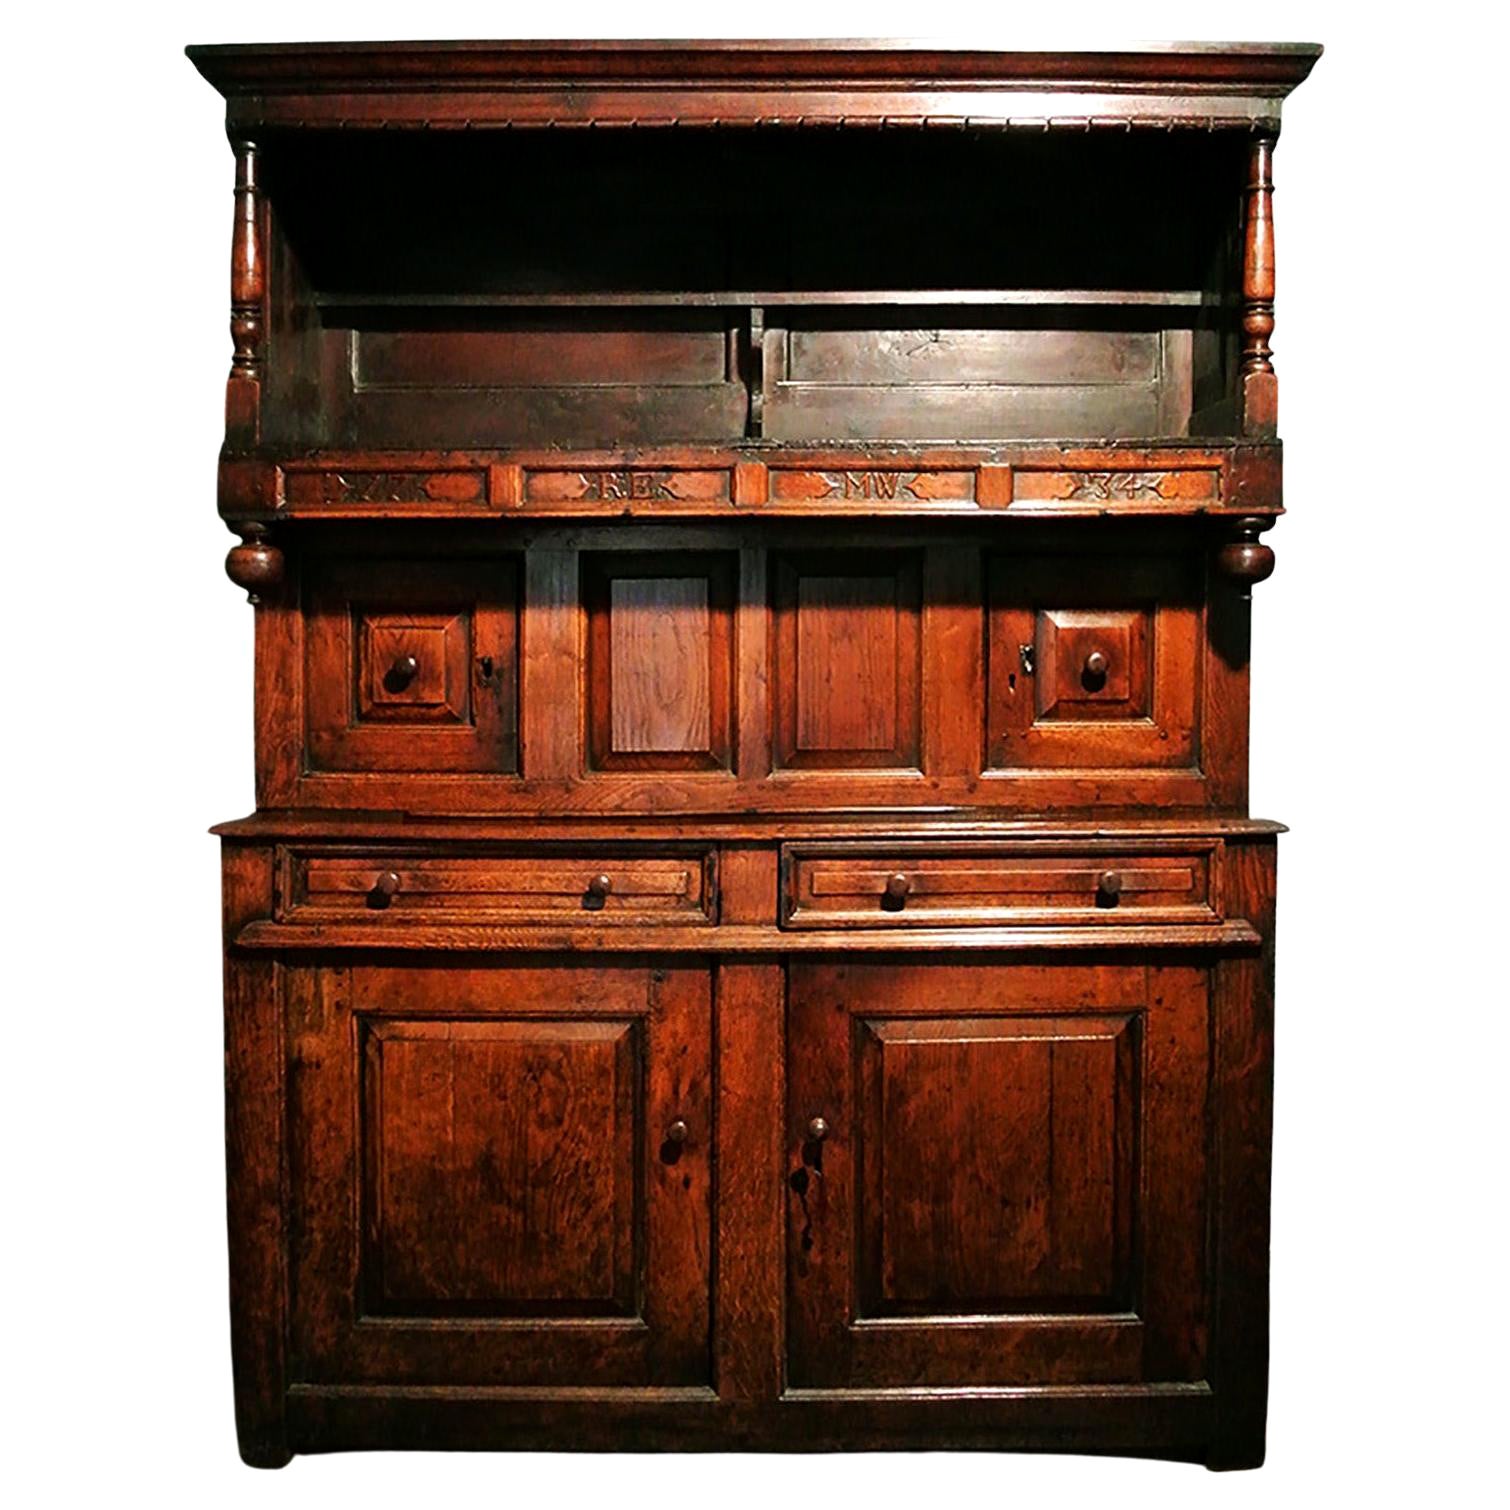 Welsh Oak Three Stage Dresser Tridarn of Superb Color - Initialed and Dated